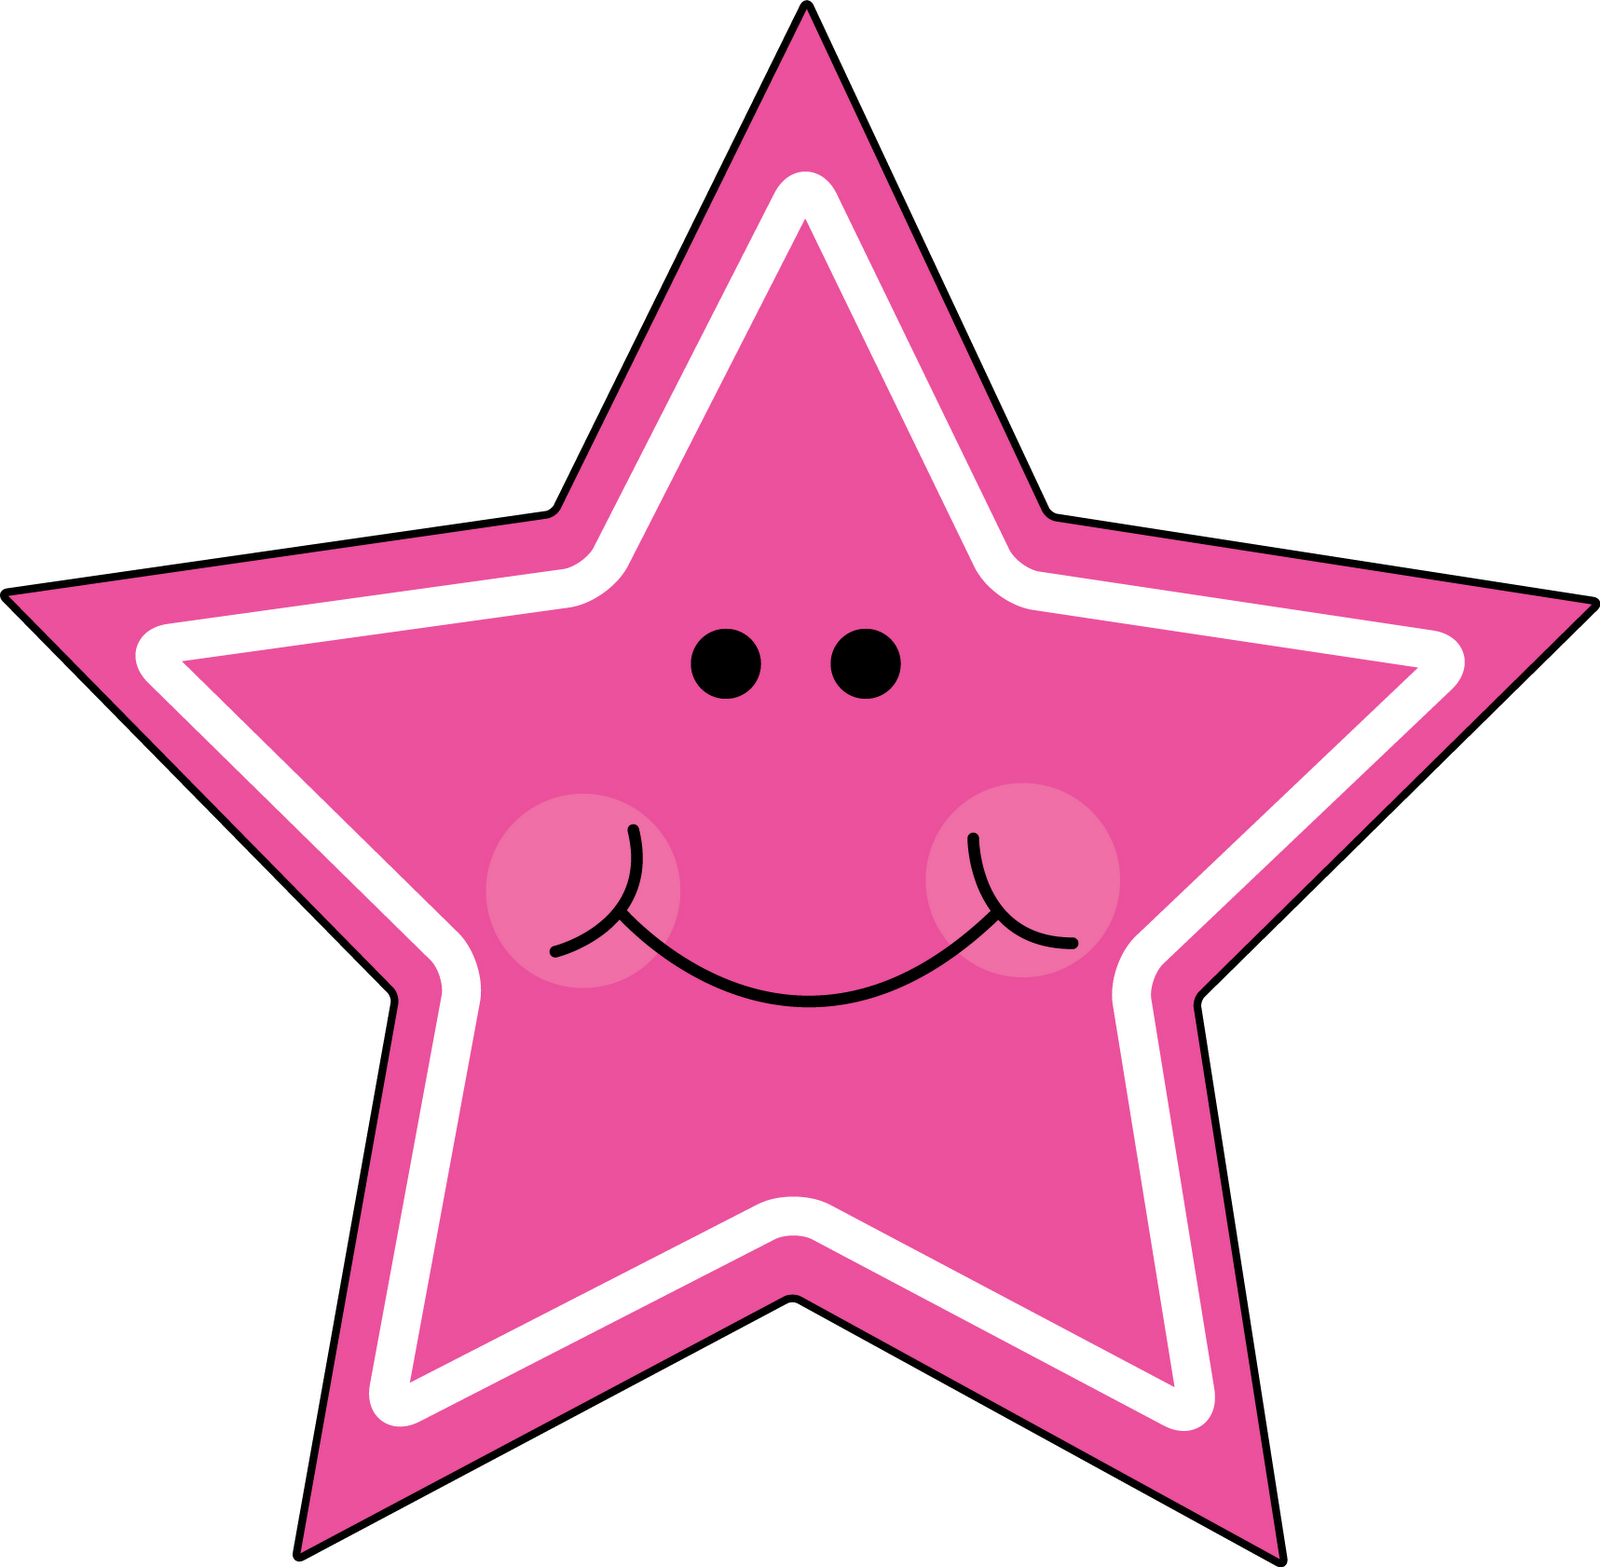 Pink Star Clip Art - Clipart library